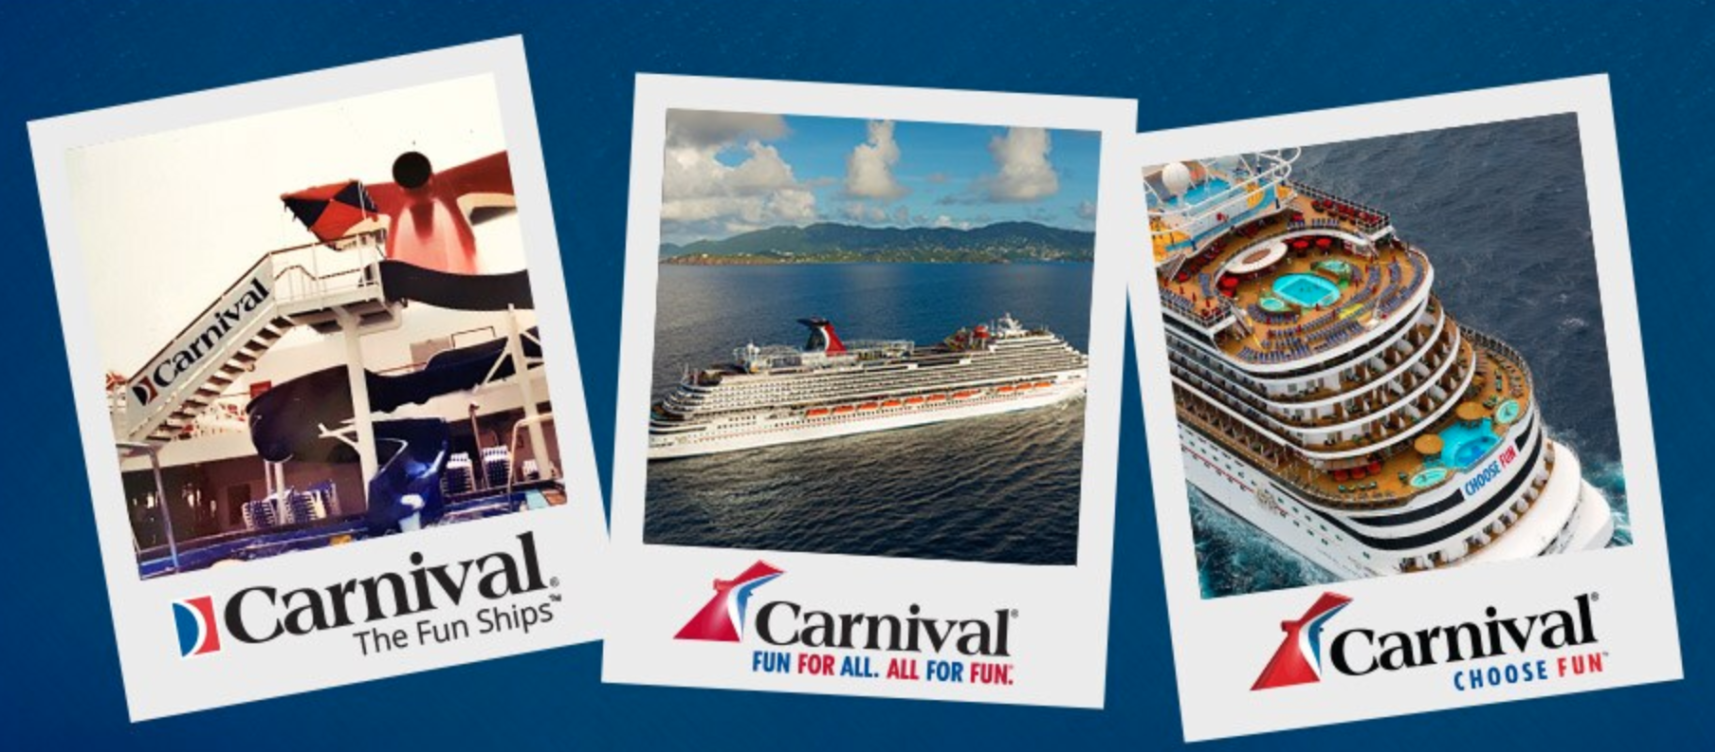 Carnival Cruise Line Review [Ships, Rooms, Destinations